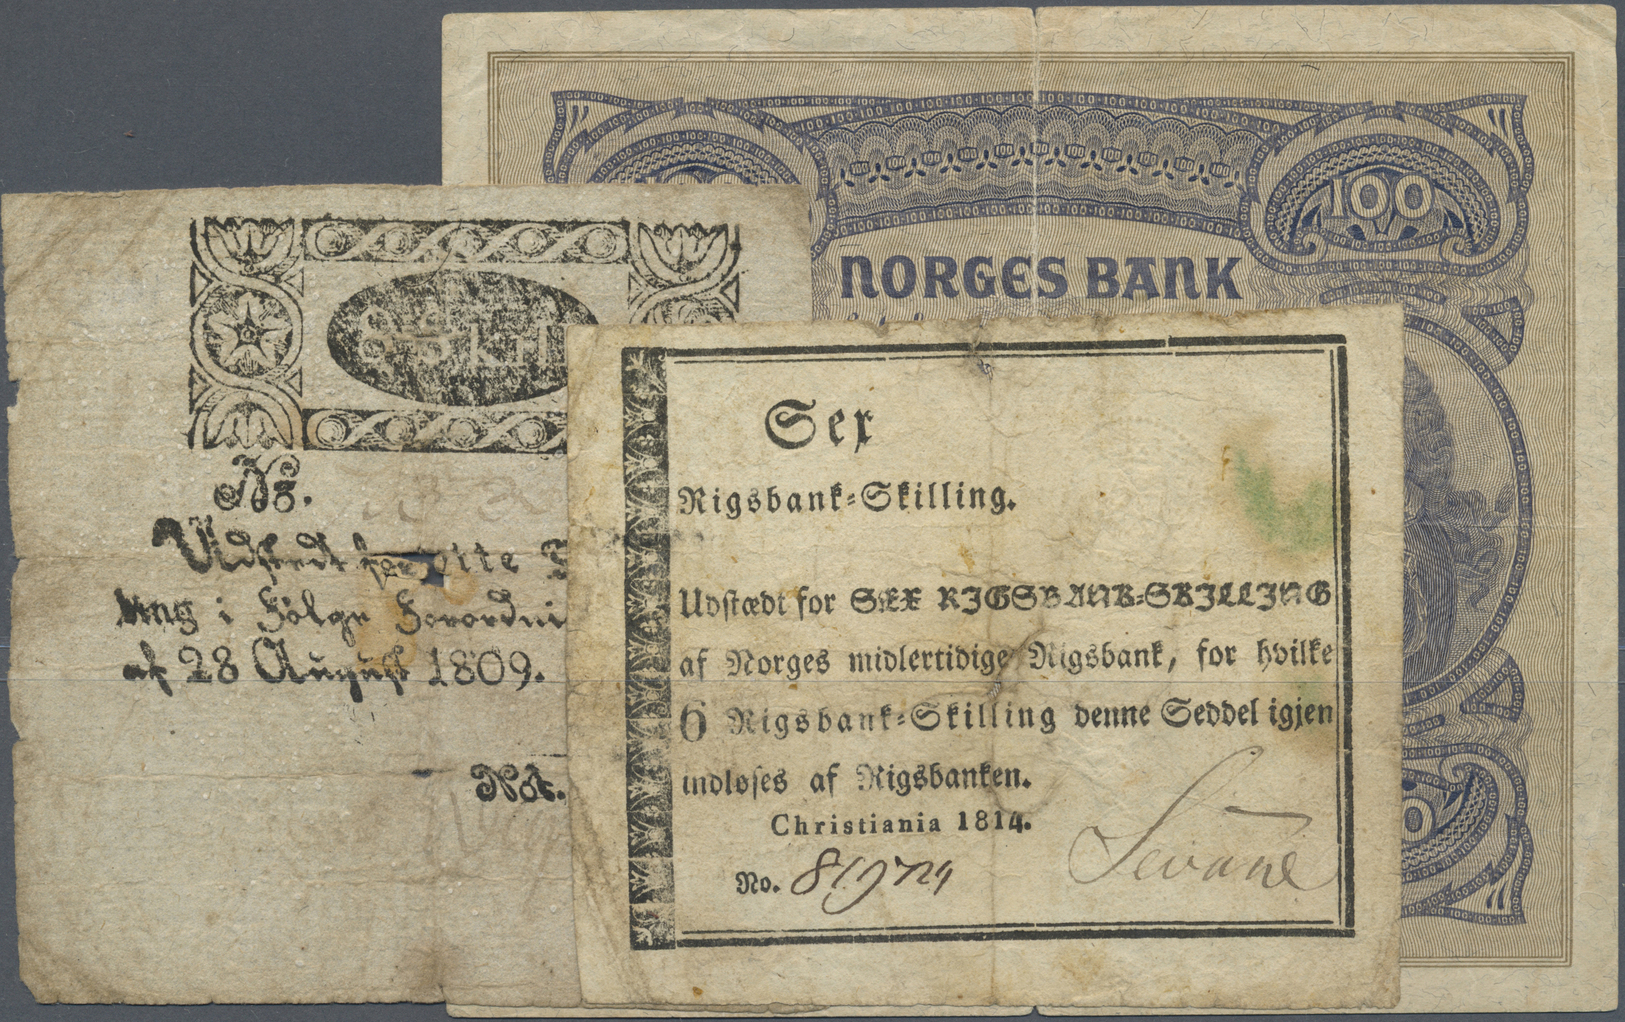 01913 Norway / Norwegen: Small Lot With 3 Banknotes 8 Skilling Denmark 1809 P.A40 (VG/F-), 6 Riksbank Skilling Norway 18 - Norway